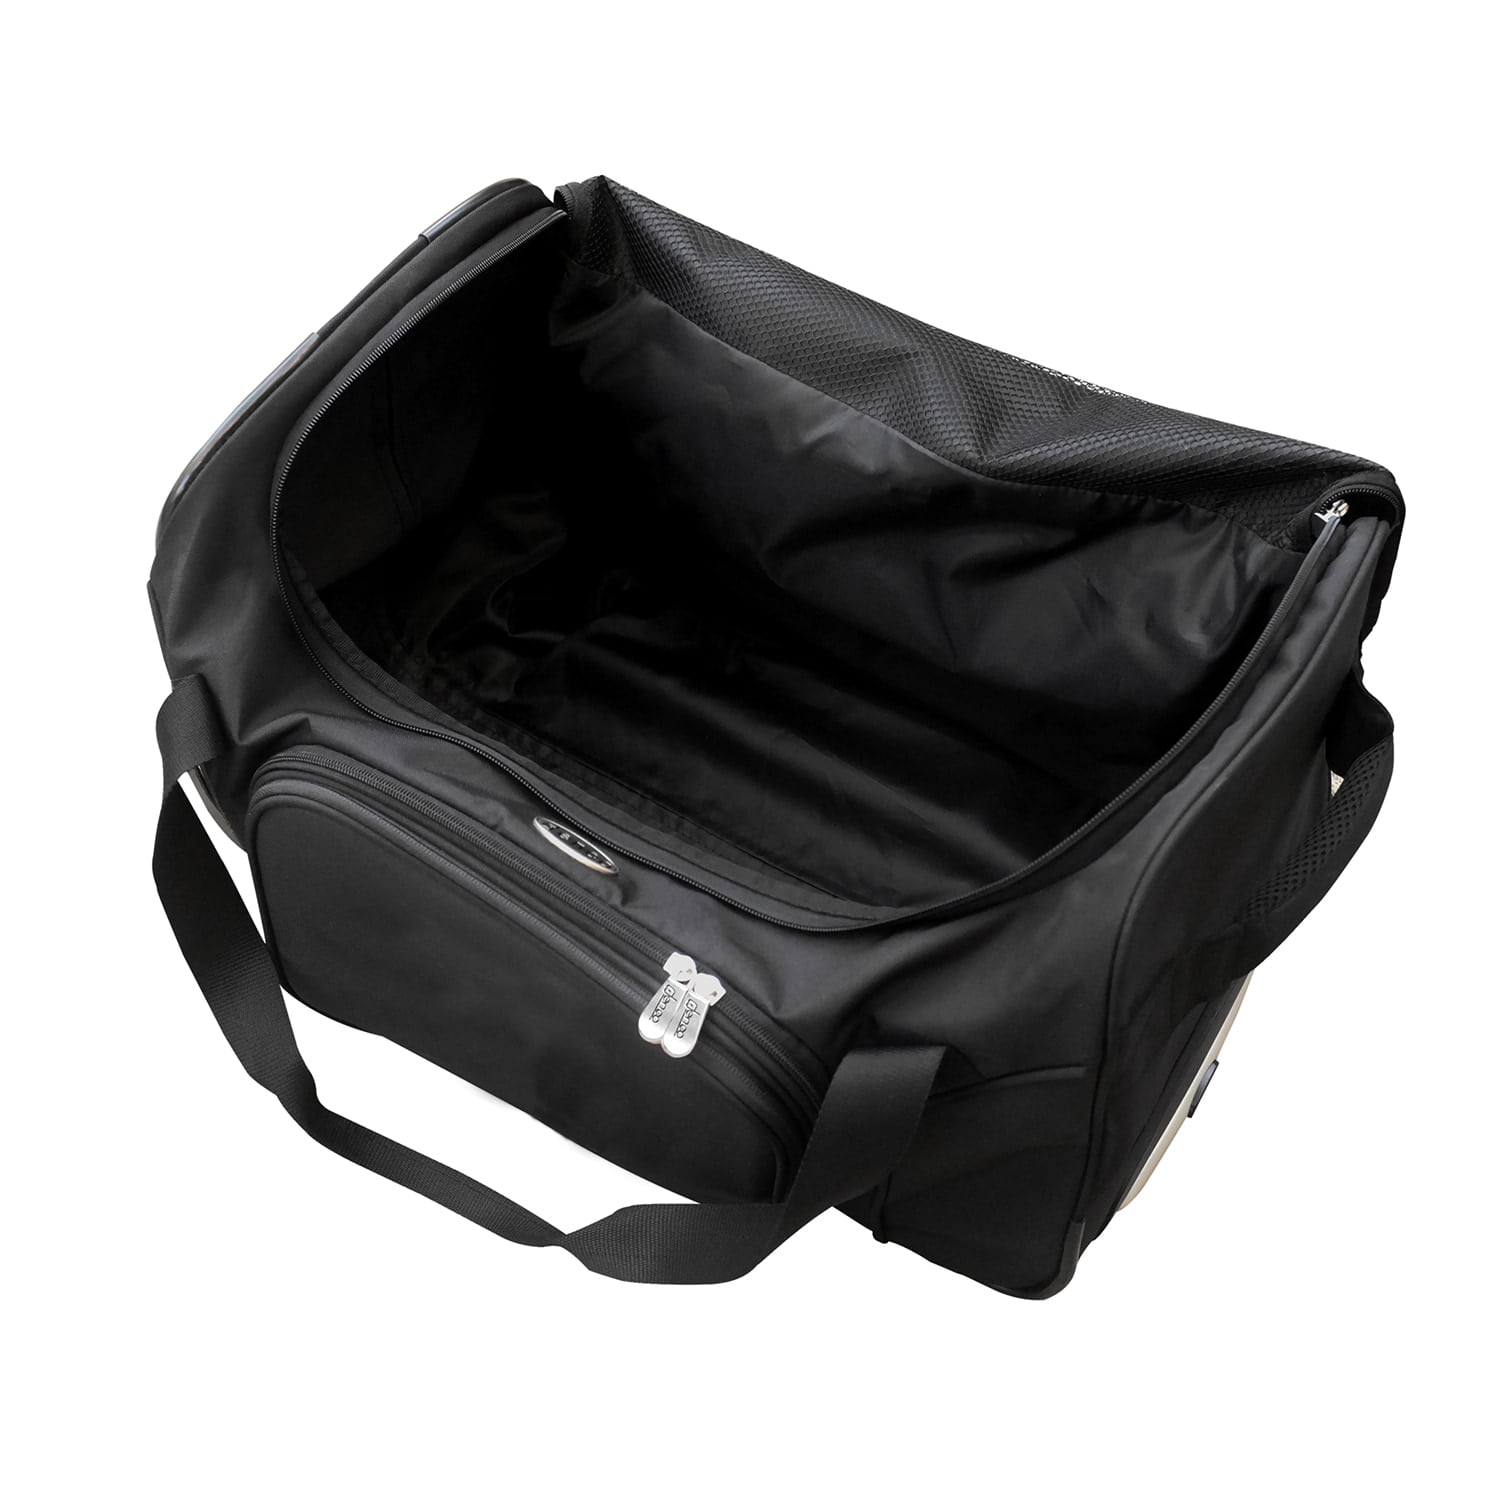 Denco NCAA Unisex Collapsible Duffel 22-inches 